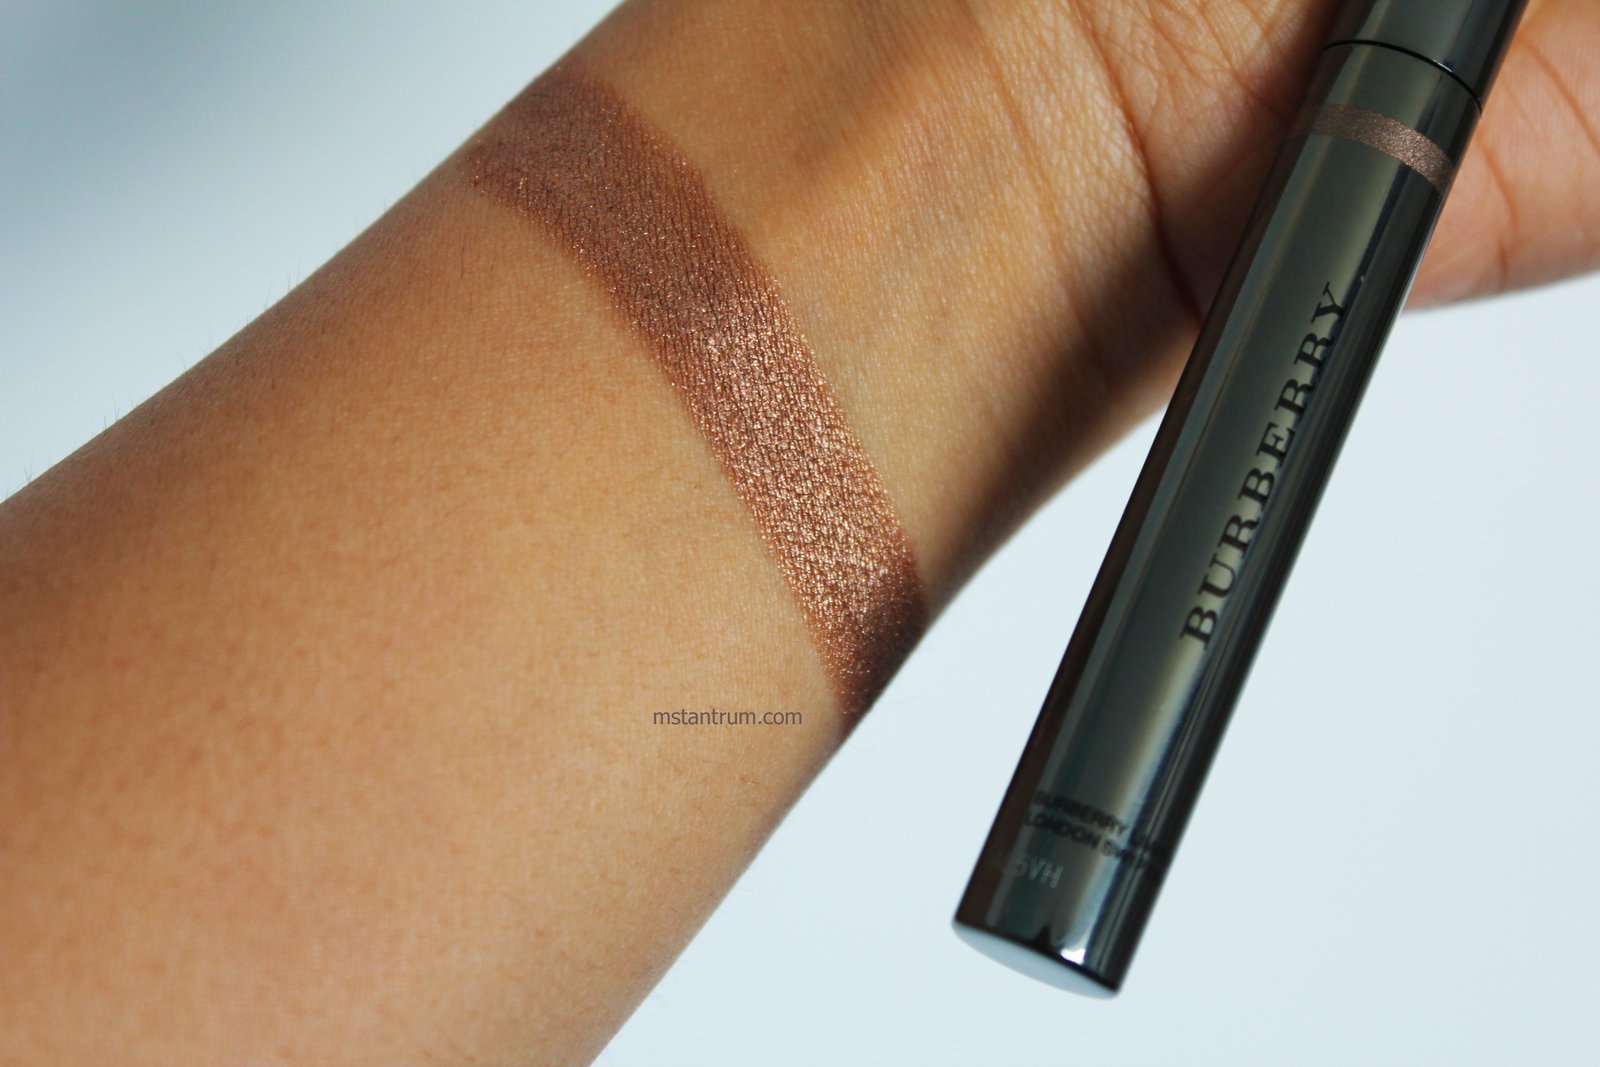 burberry pale copper eyeshadow stick swatch without Flash